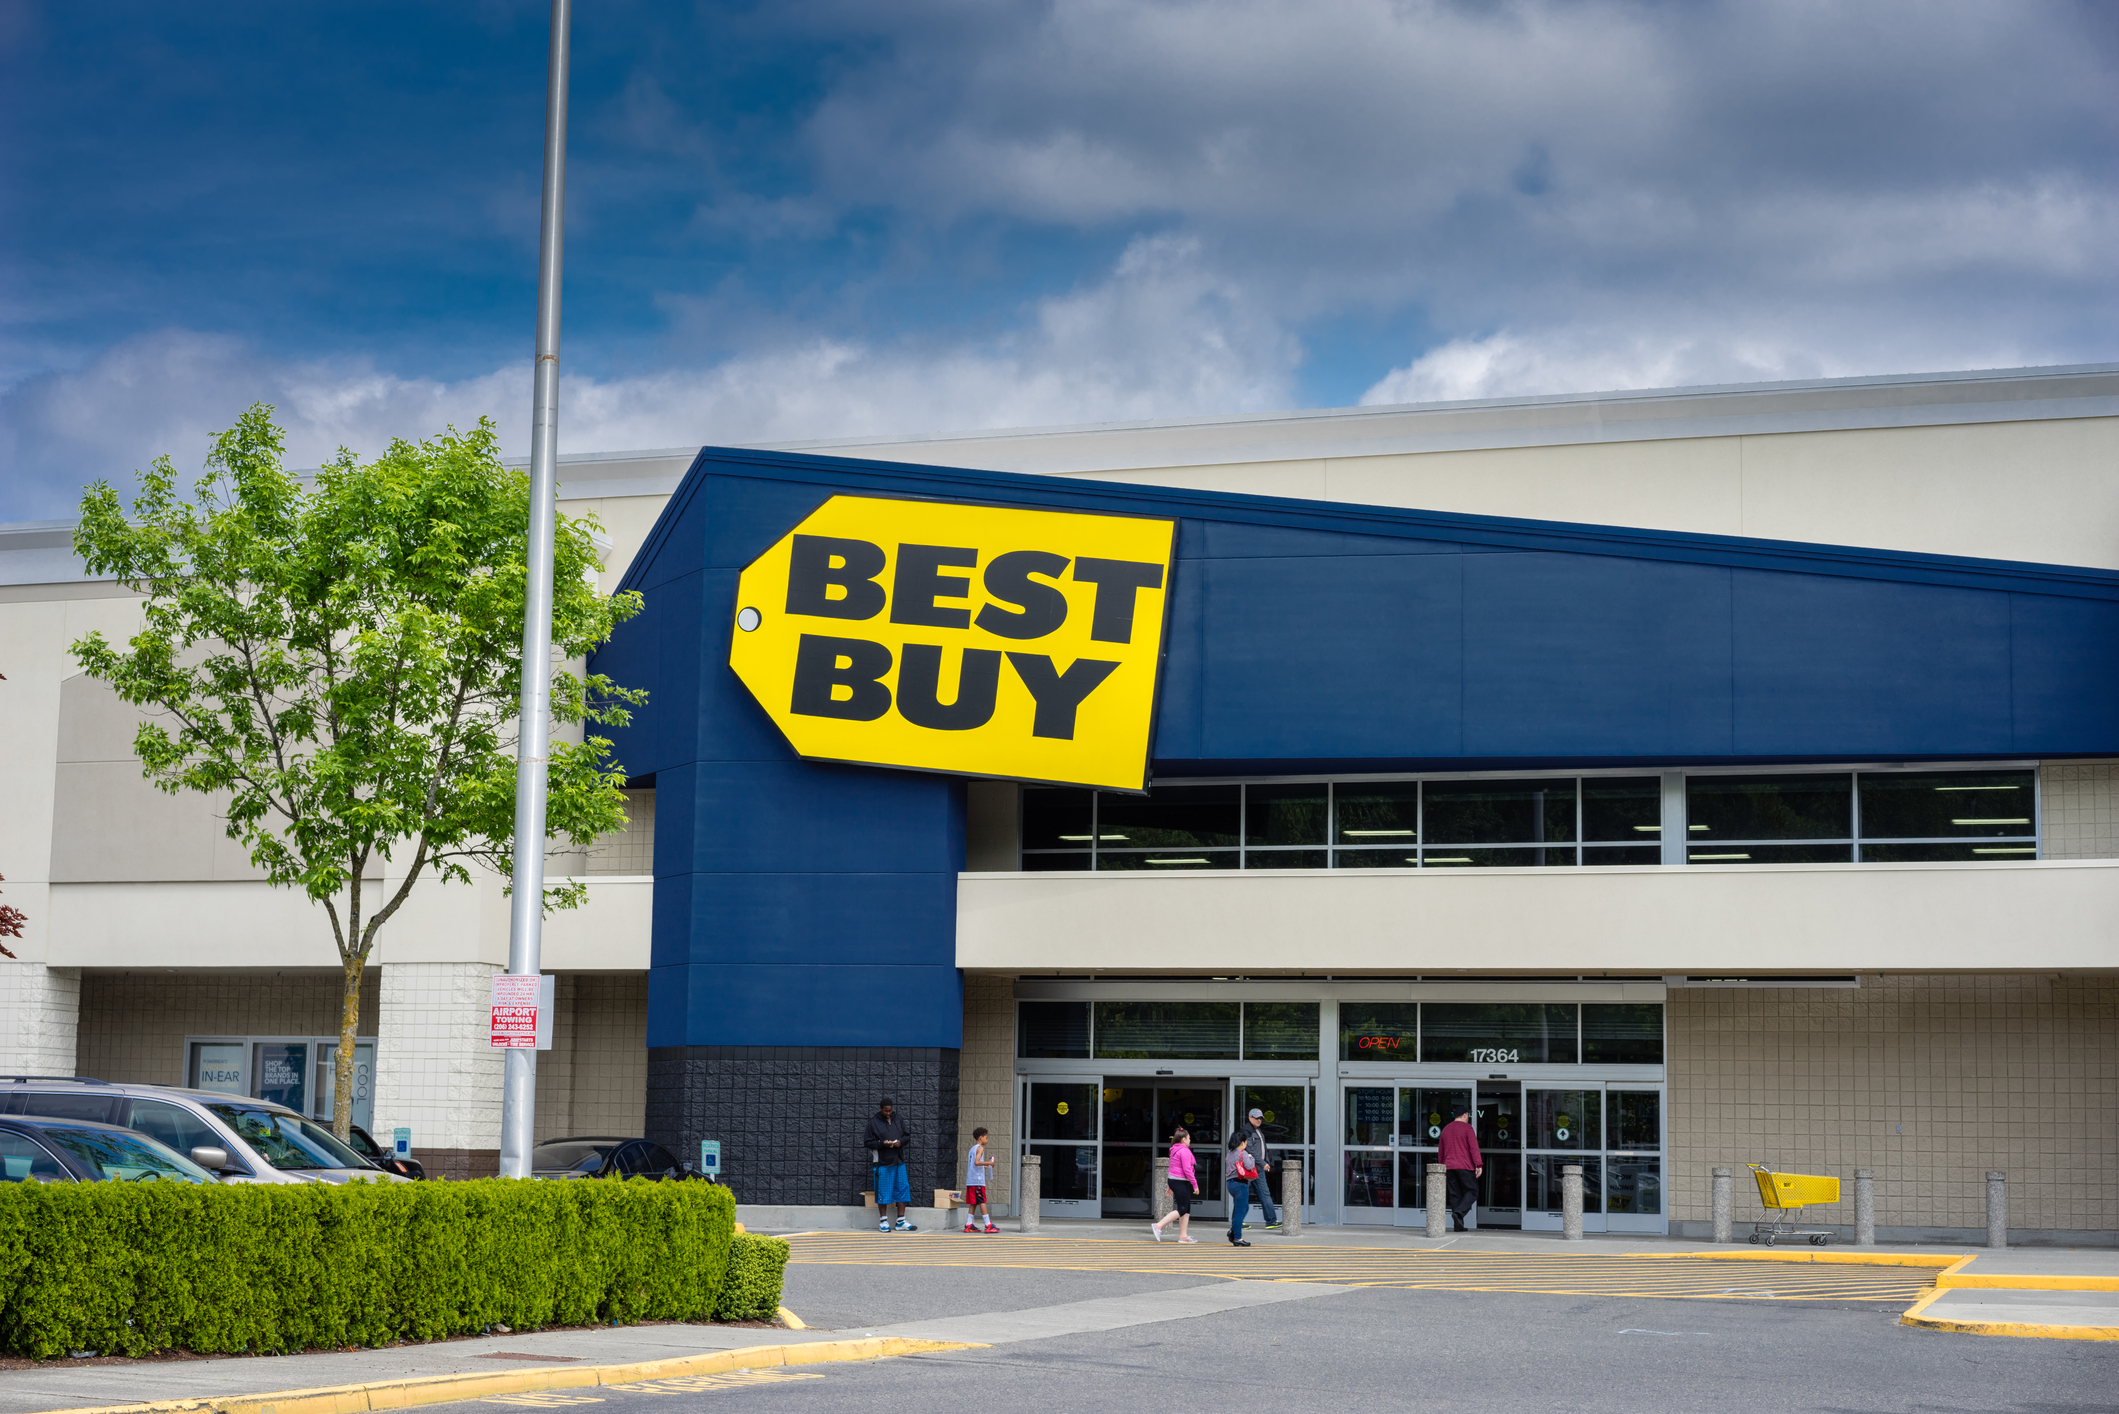 5 ways to save money at Best Buy